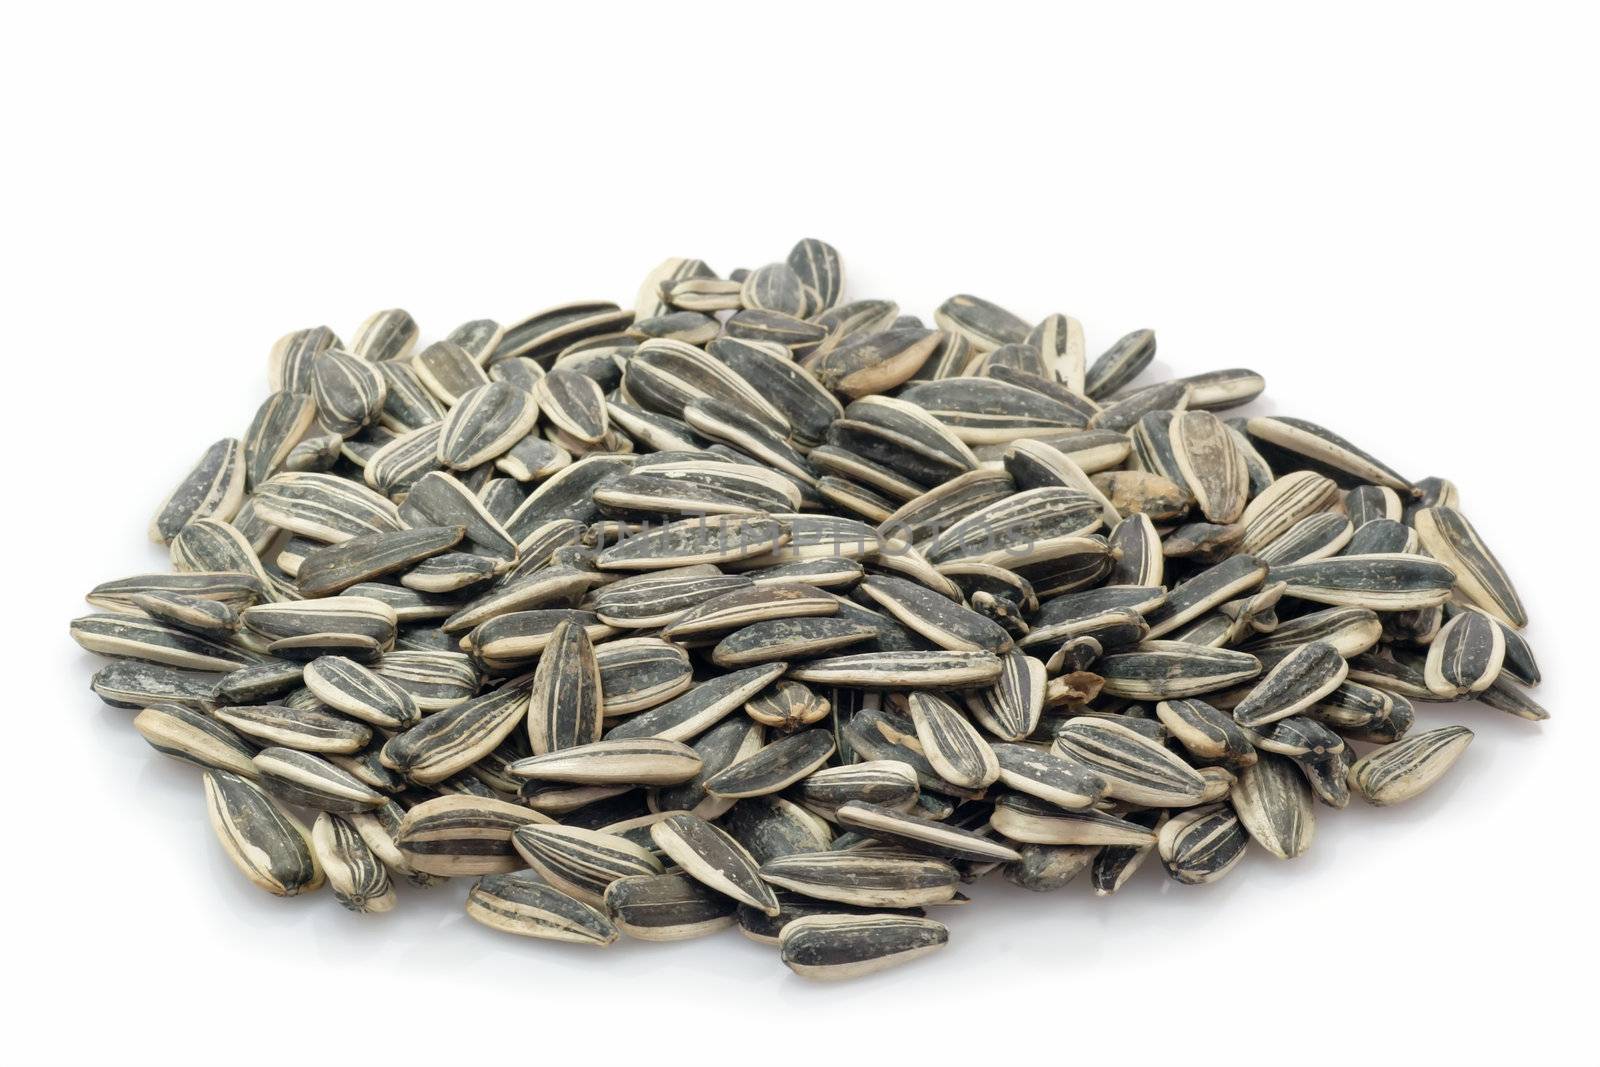 Sunflower seeds on a bright background